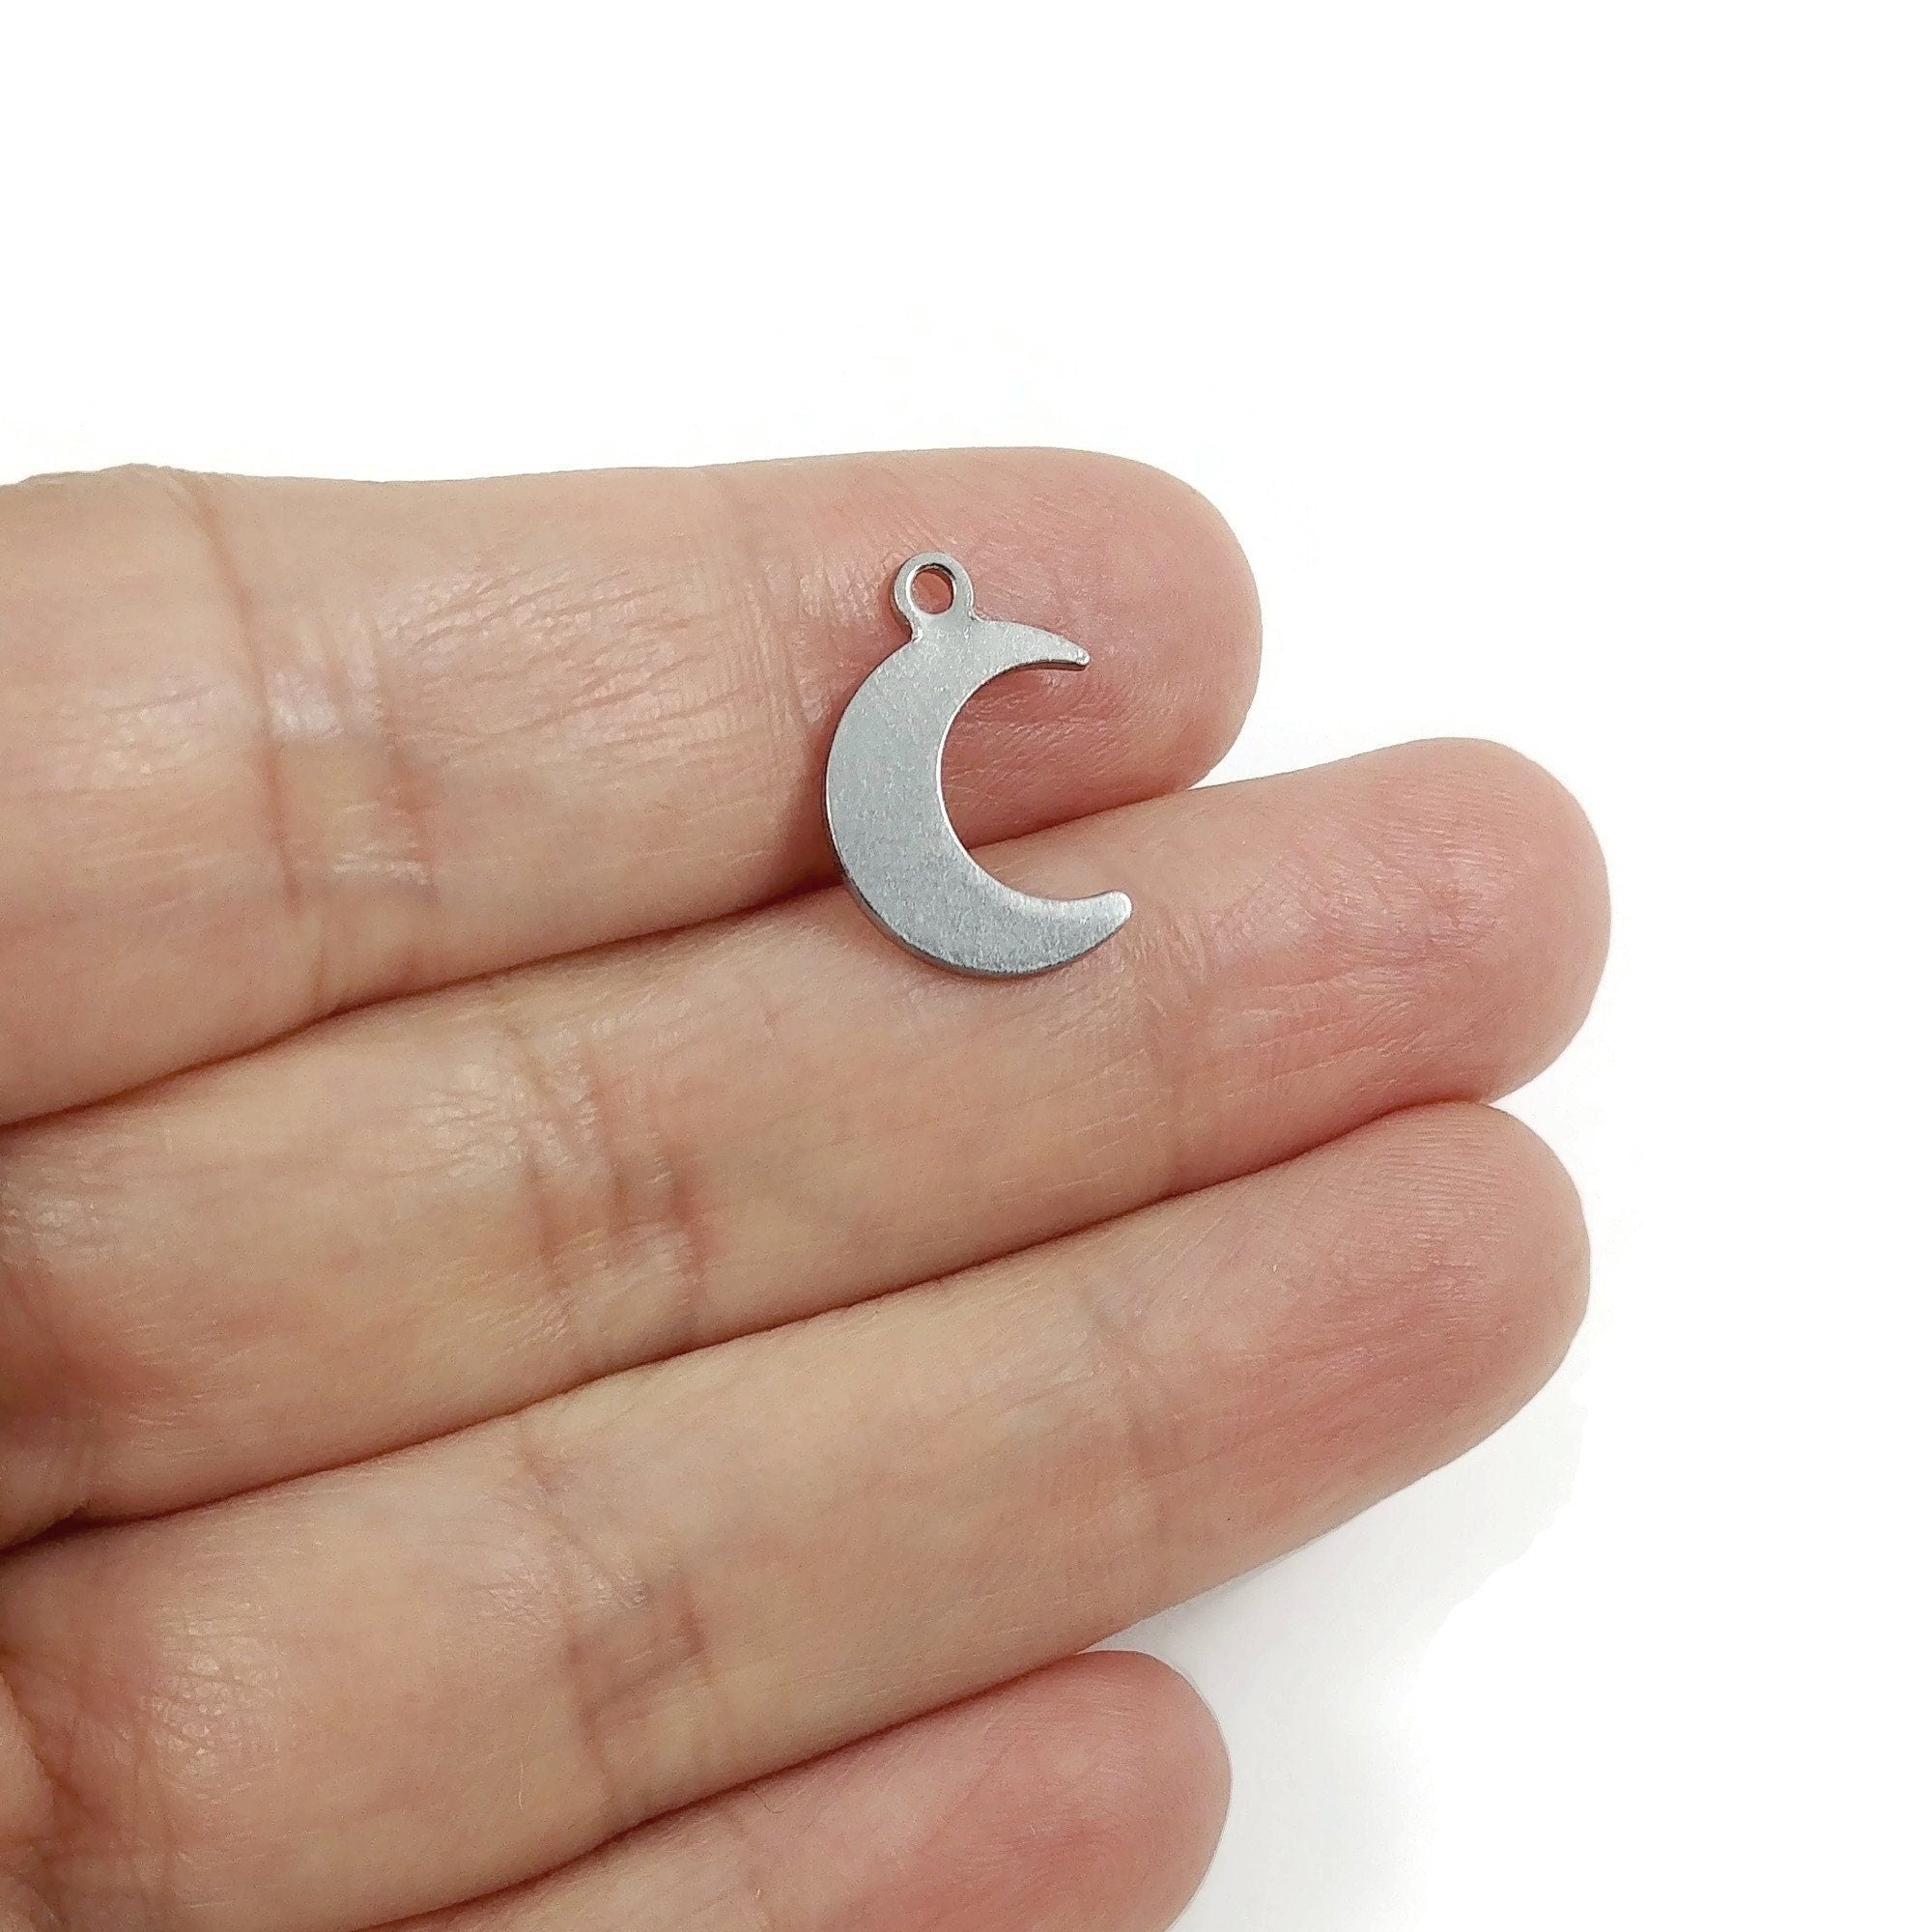 10 silver moon charms, Small stainless steel charms, Crescent moon pendants for jewelry making